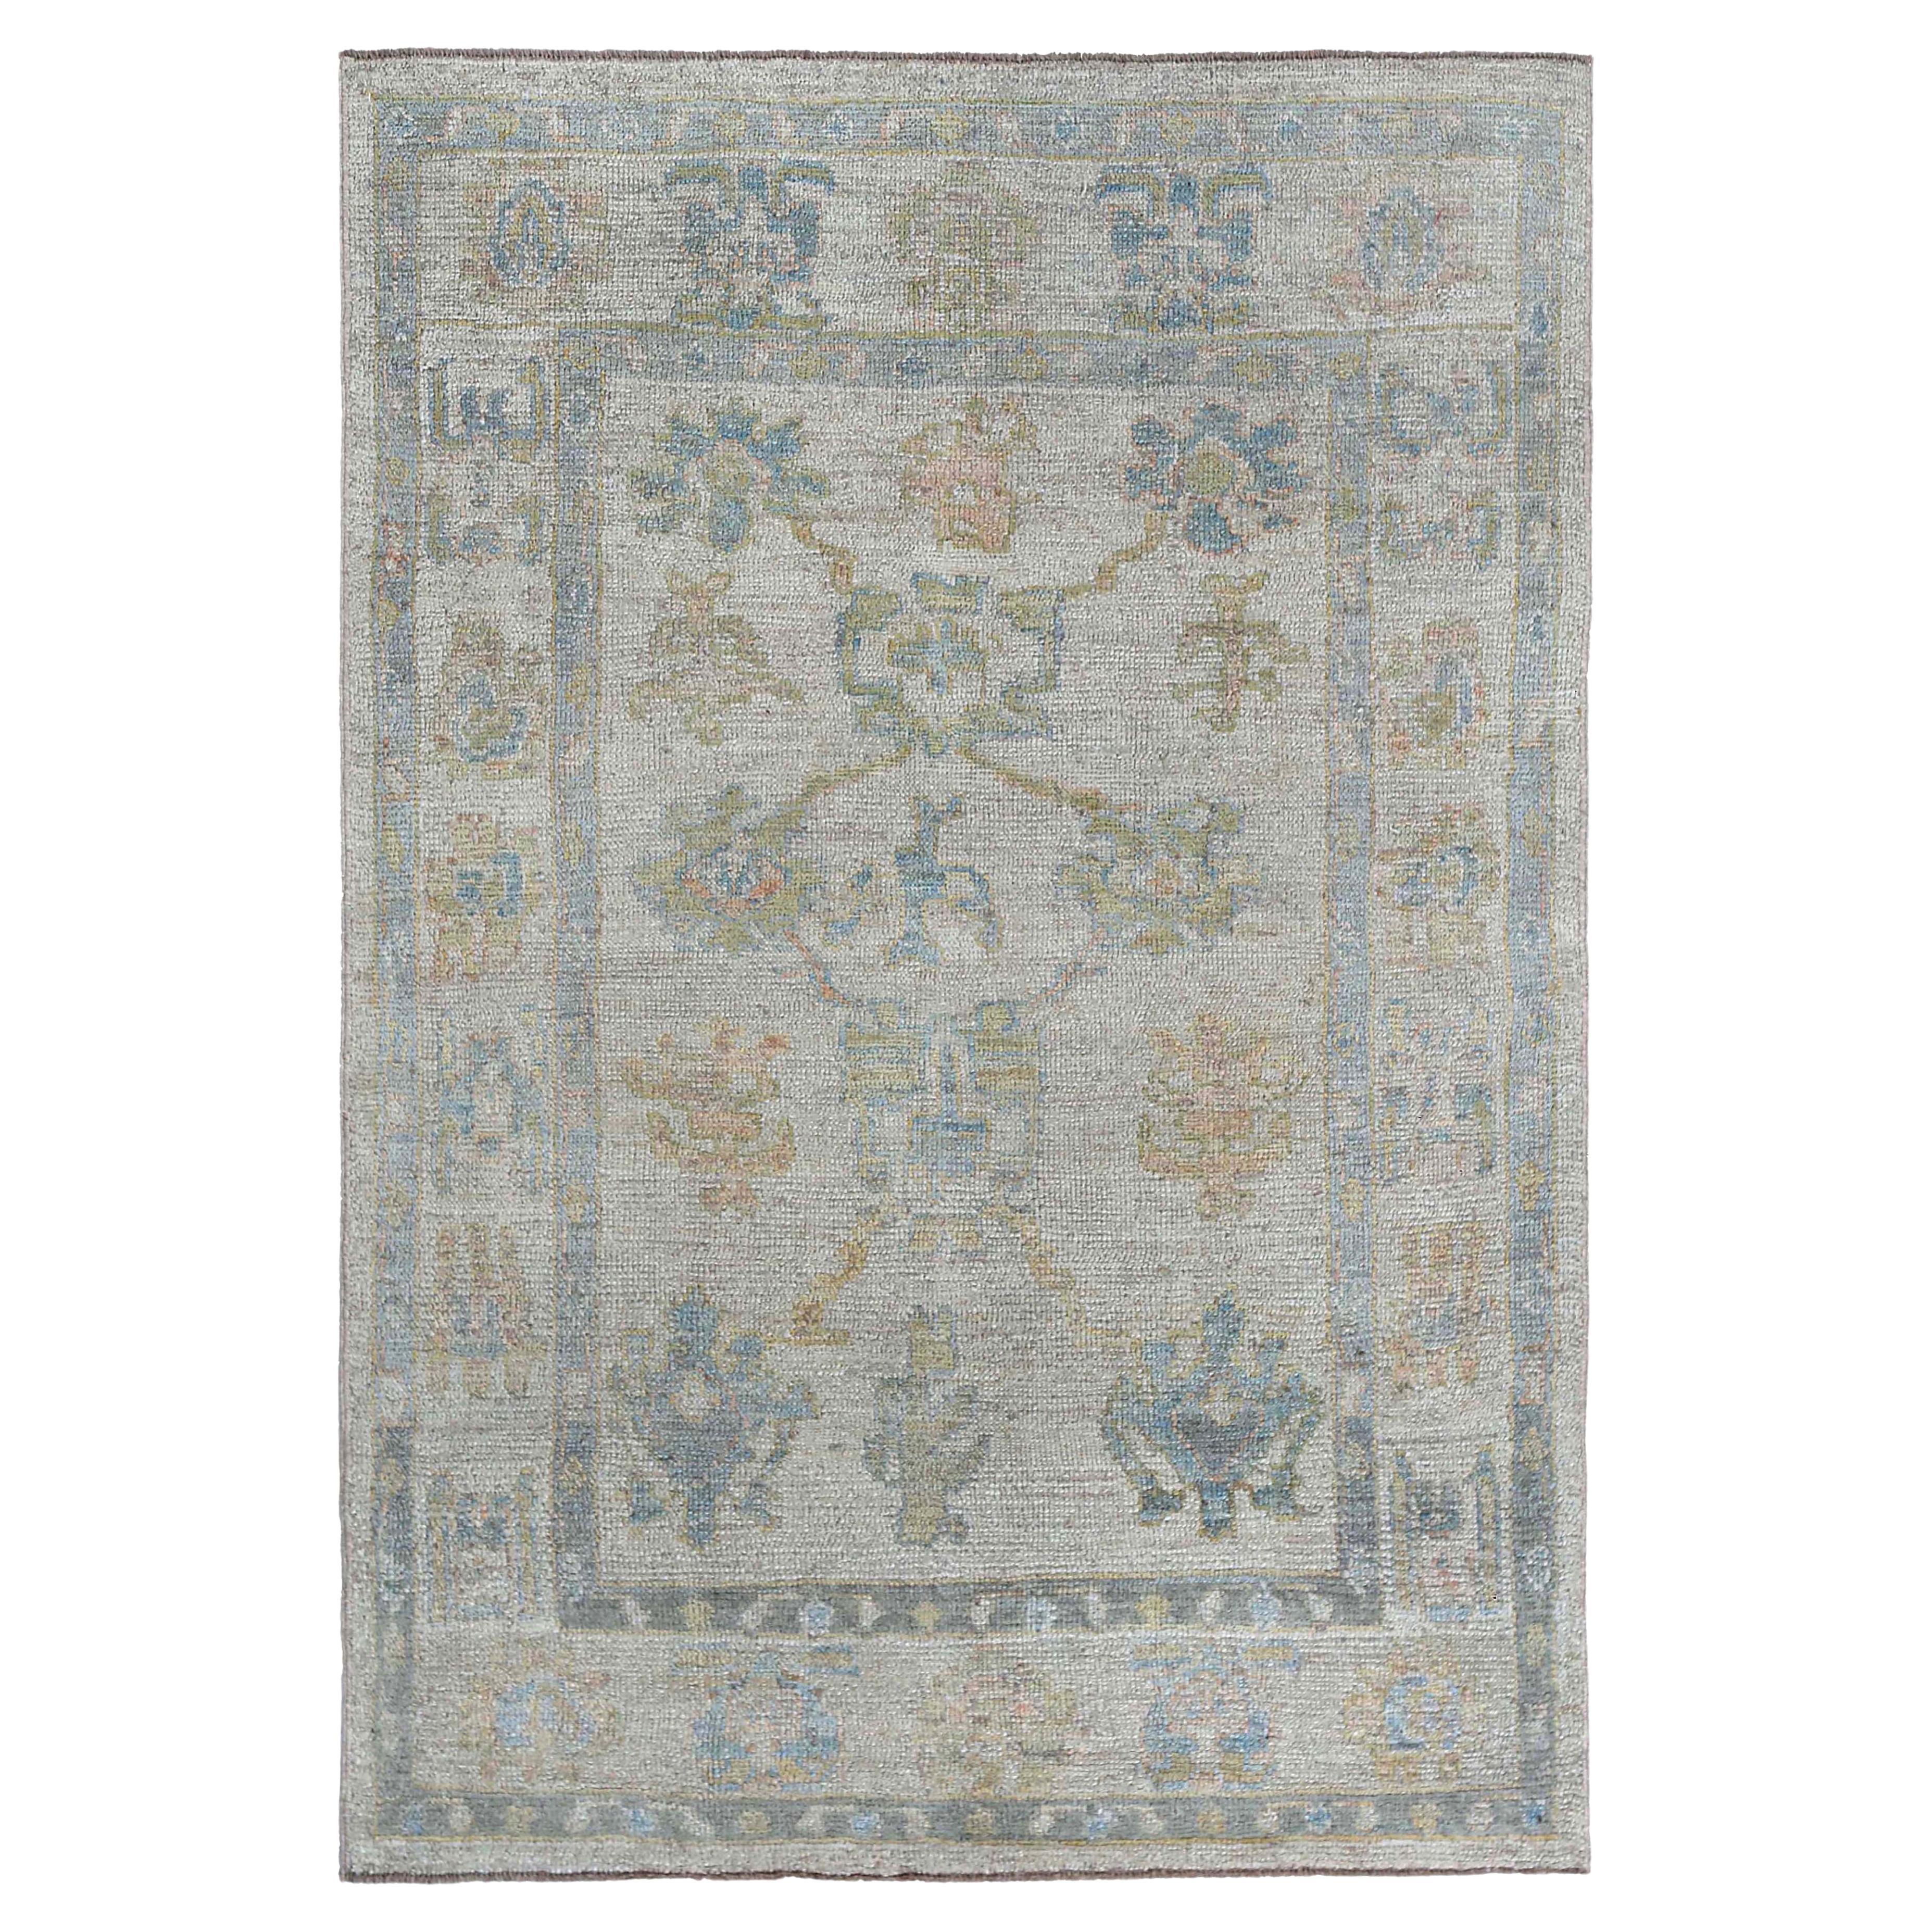 Faded Oushak Rug with Blue Tones